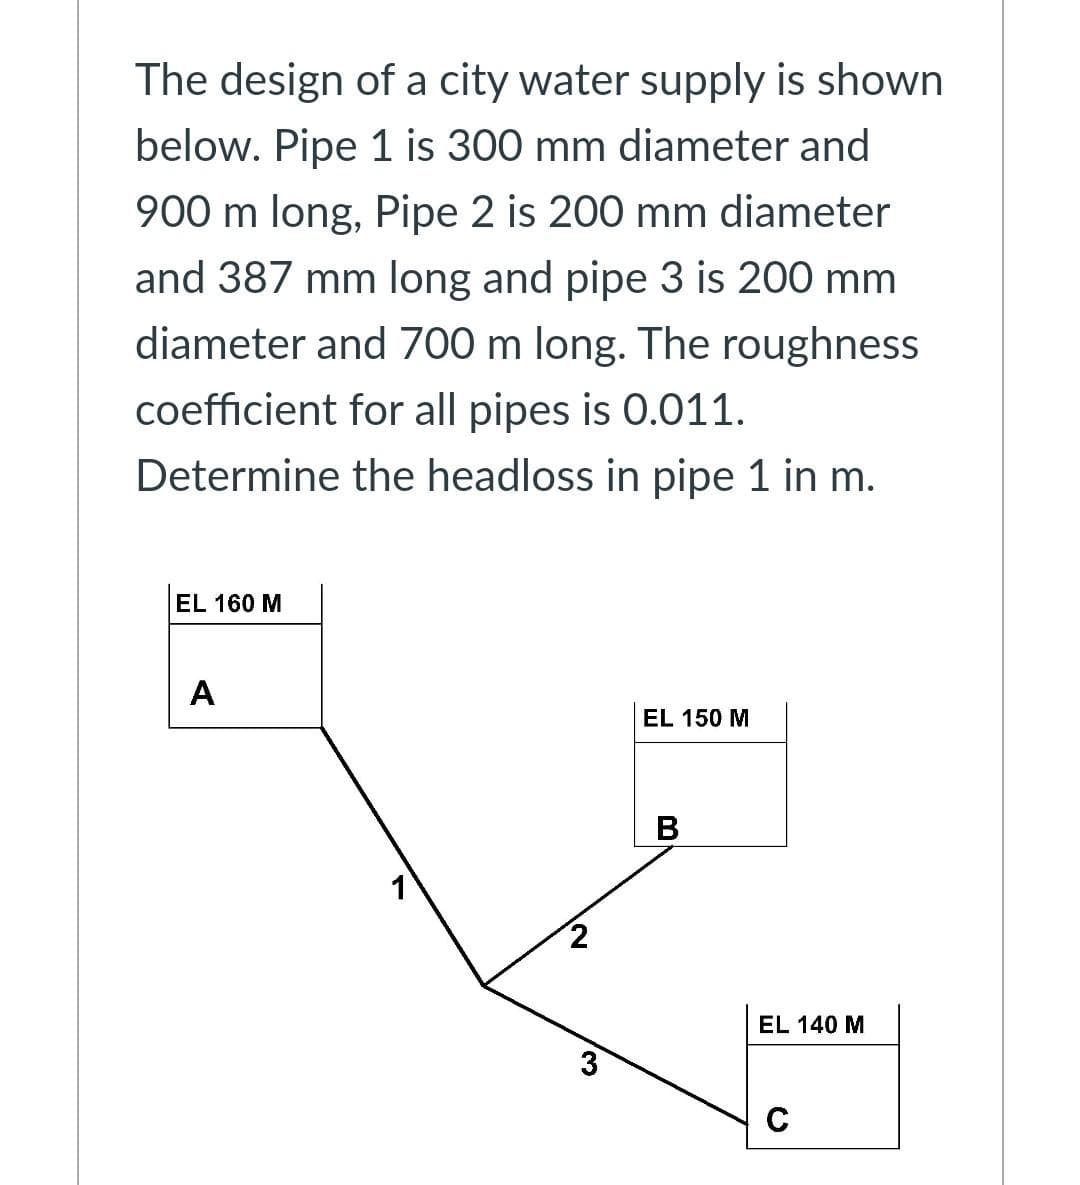 The design of a city water supply is shown
below. Pipe 1 is 300 mm diameter and
900 m long, Pipe 2 is 200 mm diameter
and 387 mm long and pipe 3 is 200 mm
diameter and 700 m long. The roughness
coefficient for all pipes is 0.011.
Determine the headloss in pipe 1 in m.
EL 160 M
A
EL 150 M
В
EL 140 M
C
3/
